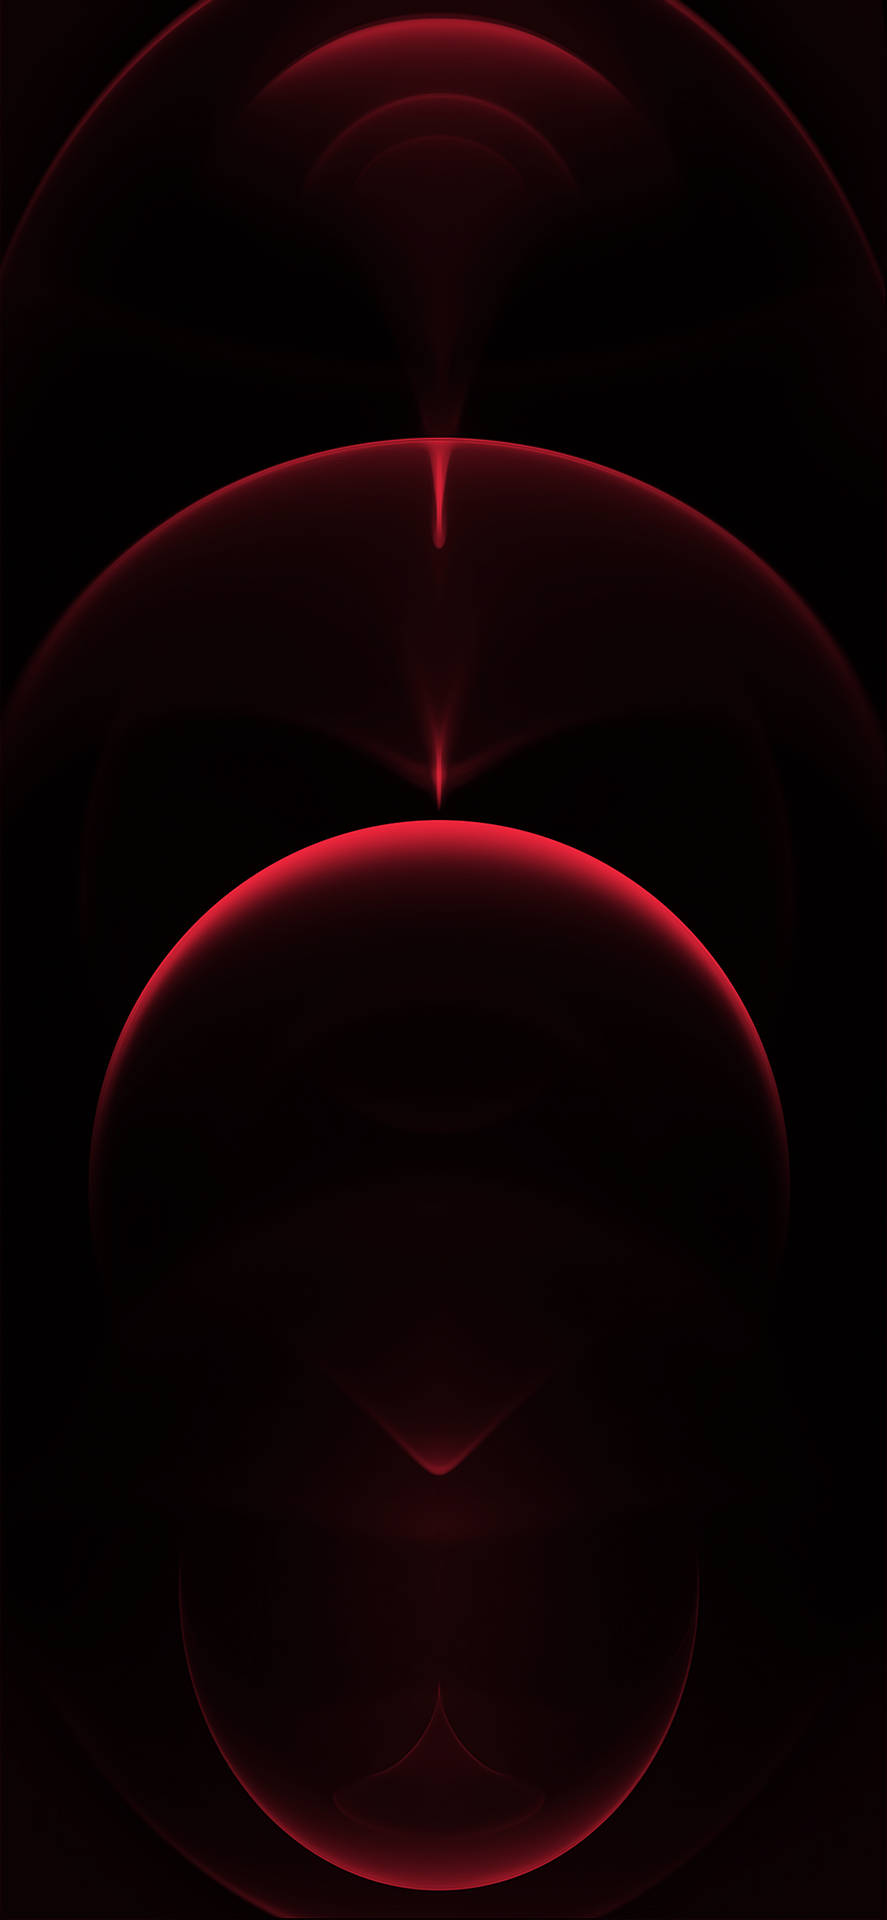 Faded Pure Red Circles Wallpaper